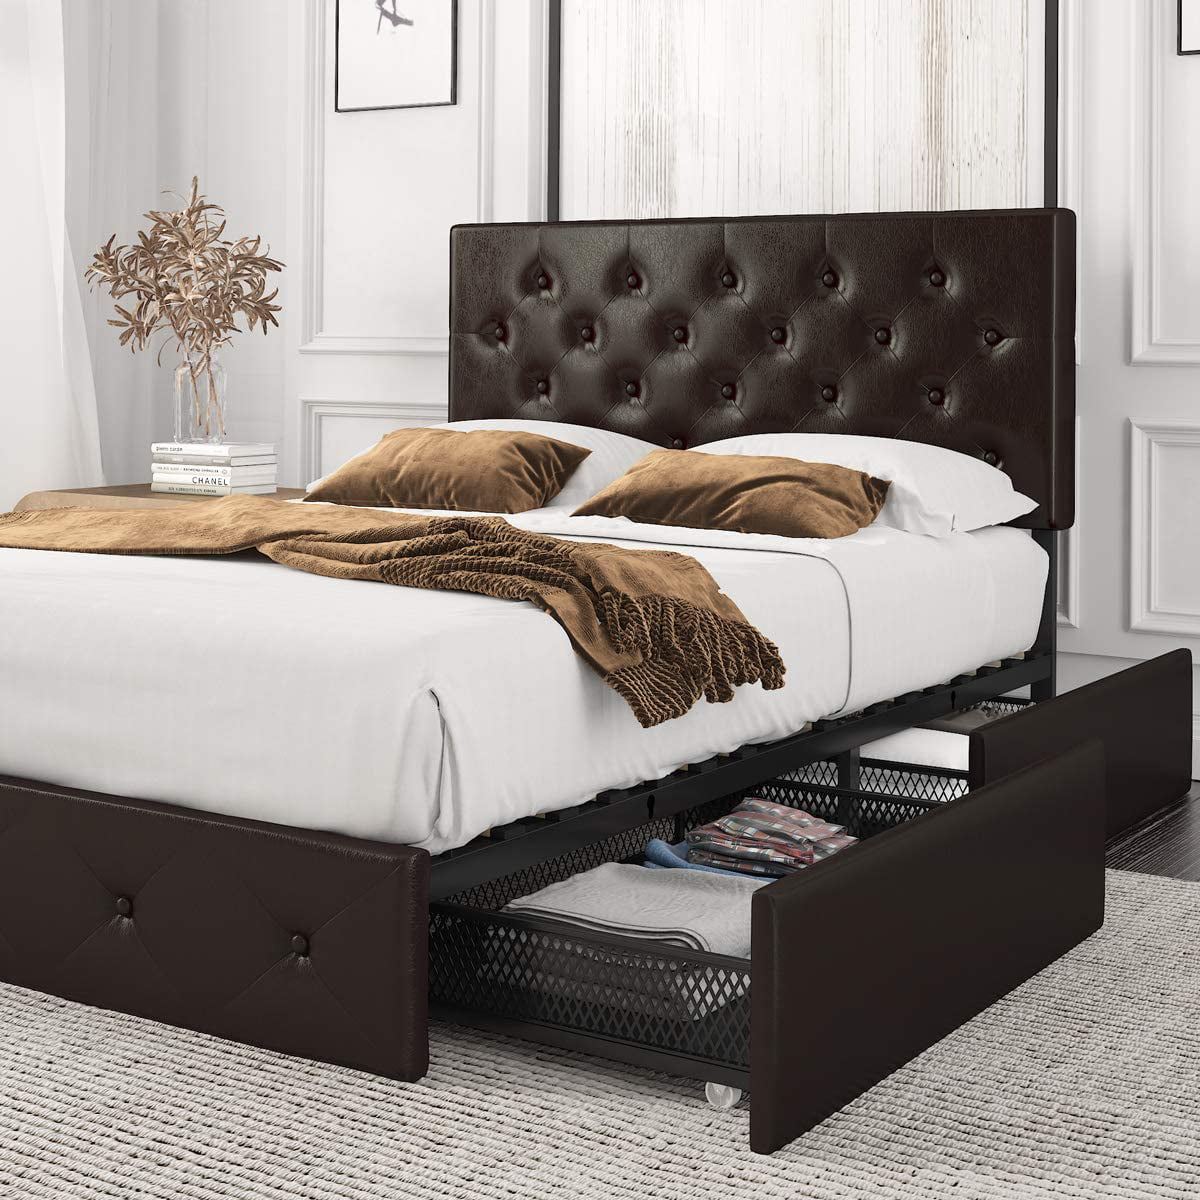 Amolife Queen Size Platform Bed Frame with 4 Storage Drawers, Faux